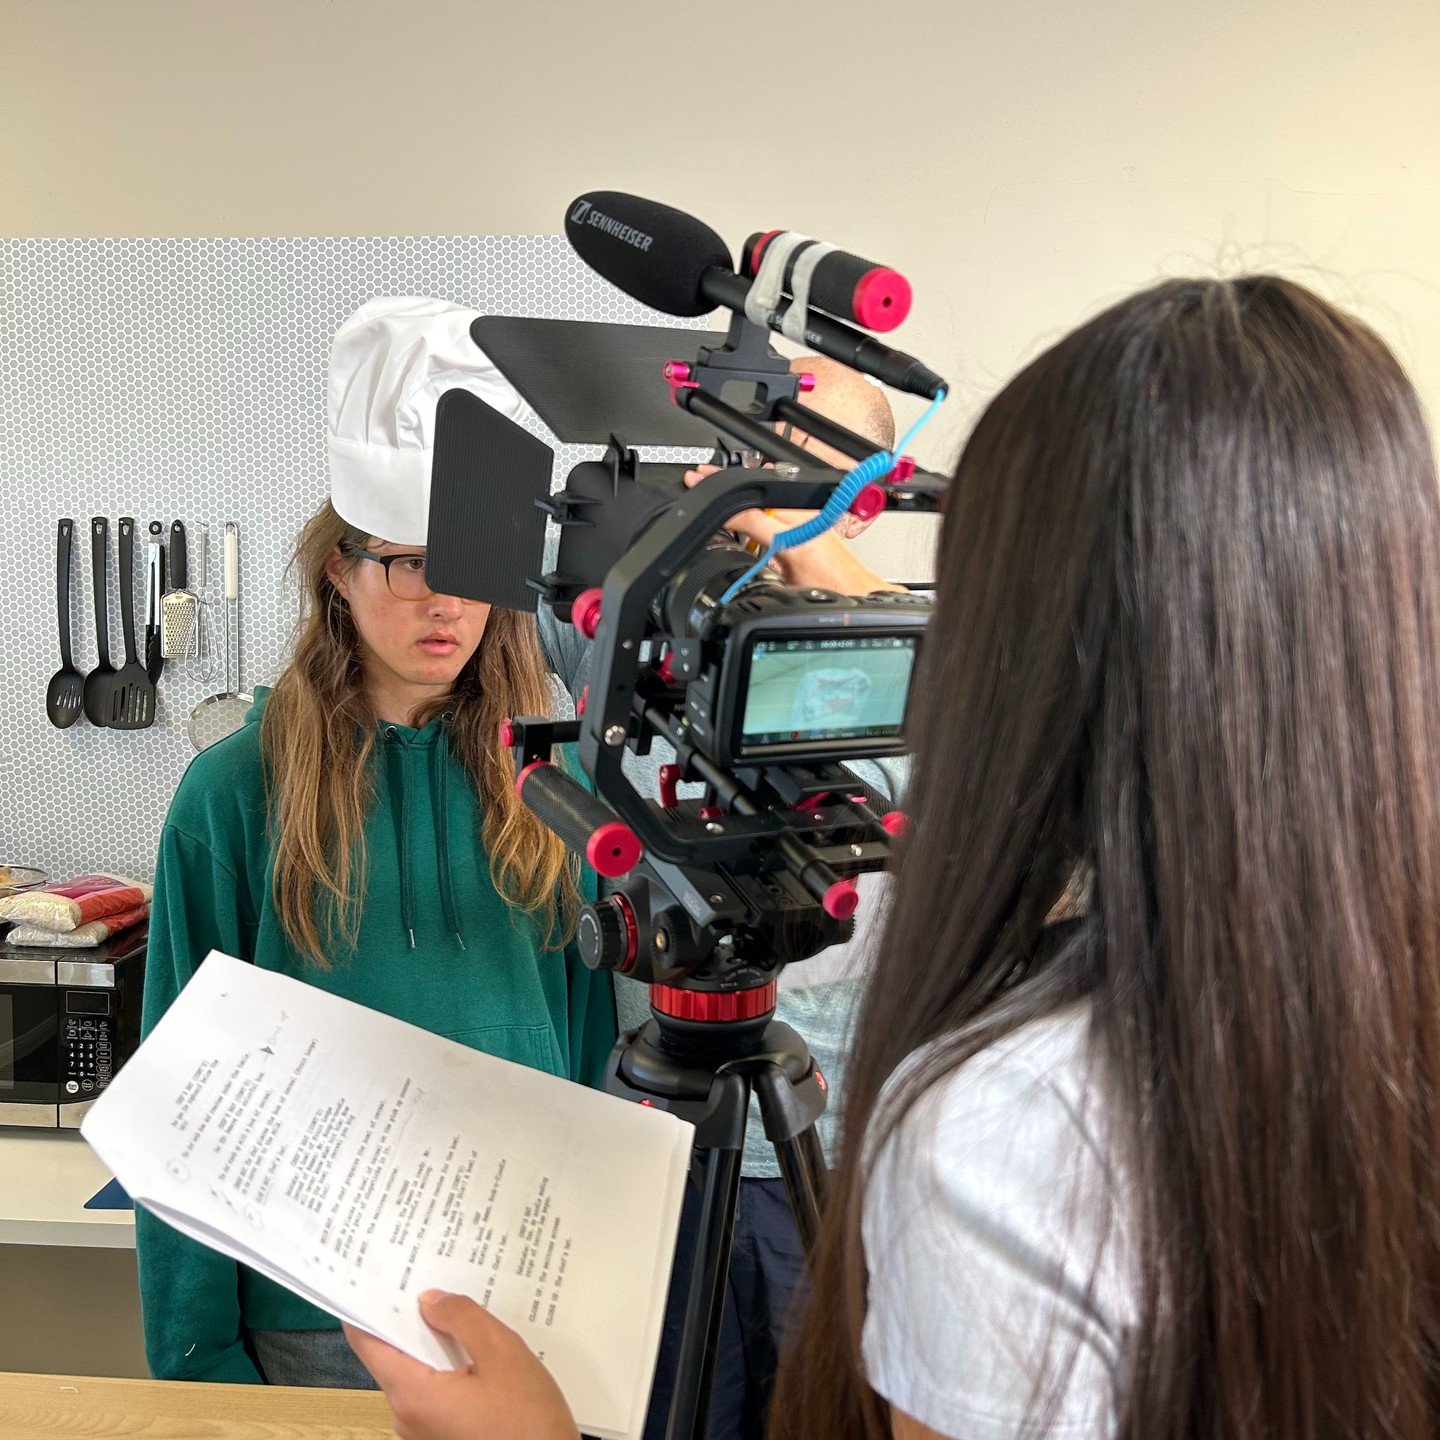 Behind the scenes on Inspyr Arts' film production, RAMEN RAMPAGE! A short film written and directed by Inspyr Arts filmmaking student, Dylan Ortega.

Join us at the Art Theatre of Long Beach @arttheatrelongbeach Saturday, February 3rd at 11am for a s